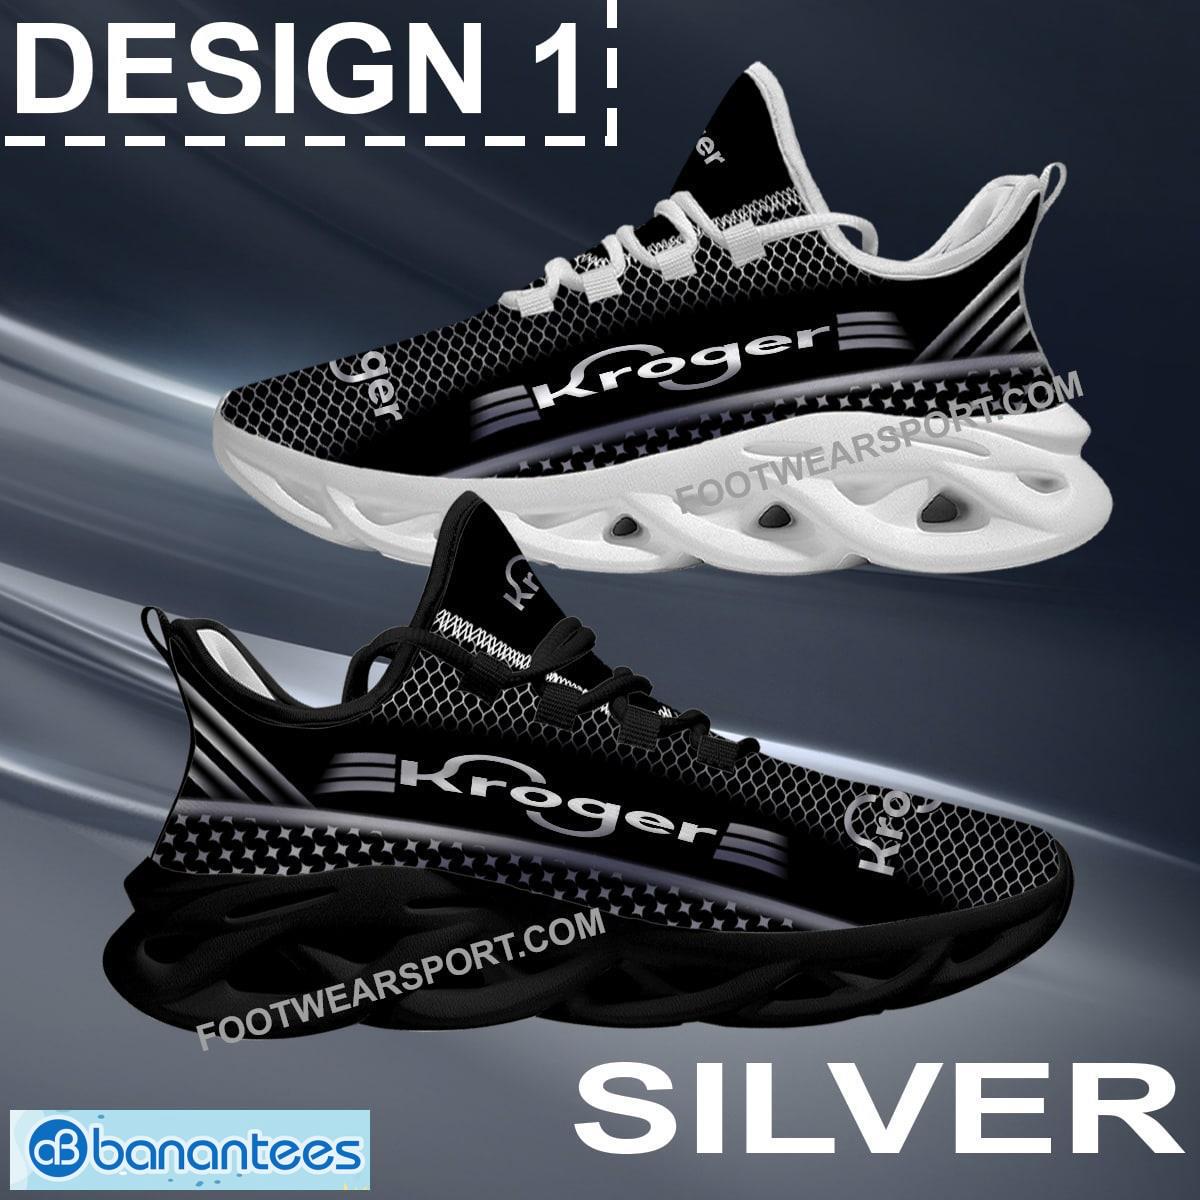 Kroger Max Soul Shoes Gold, Diamond, Silver All Over Print Culture Running Sneaker Gift - Brand Kroger Max Soul Shoes Style 1